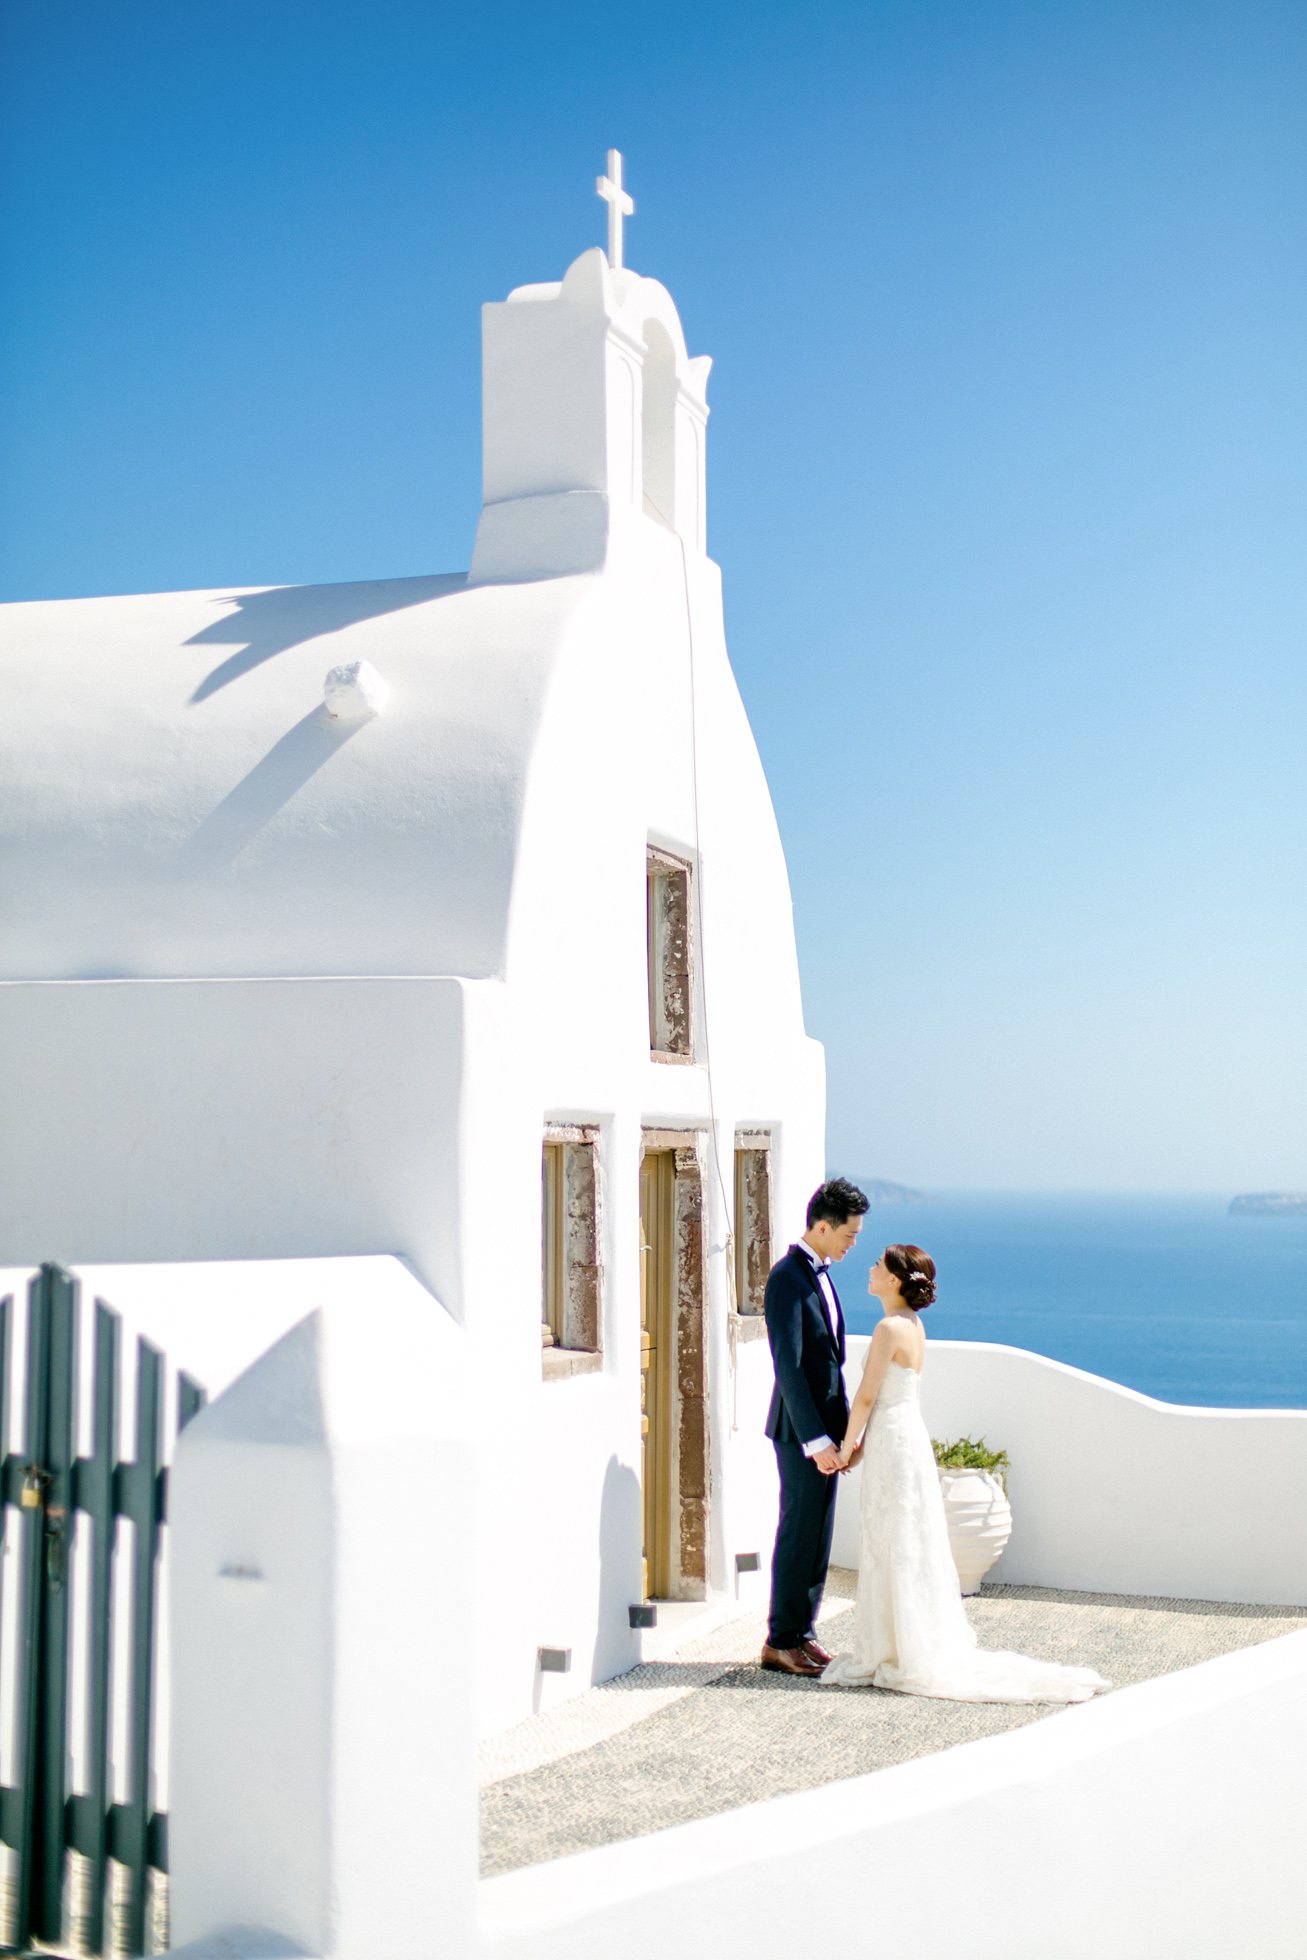 Professional Santorini wedding day photoshoot, groom and bride are posing with the picturesque background of Oia, seaview and clear blue skies.